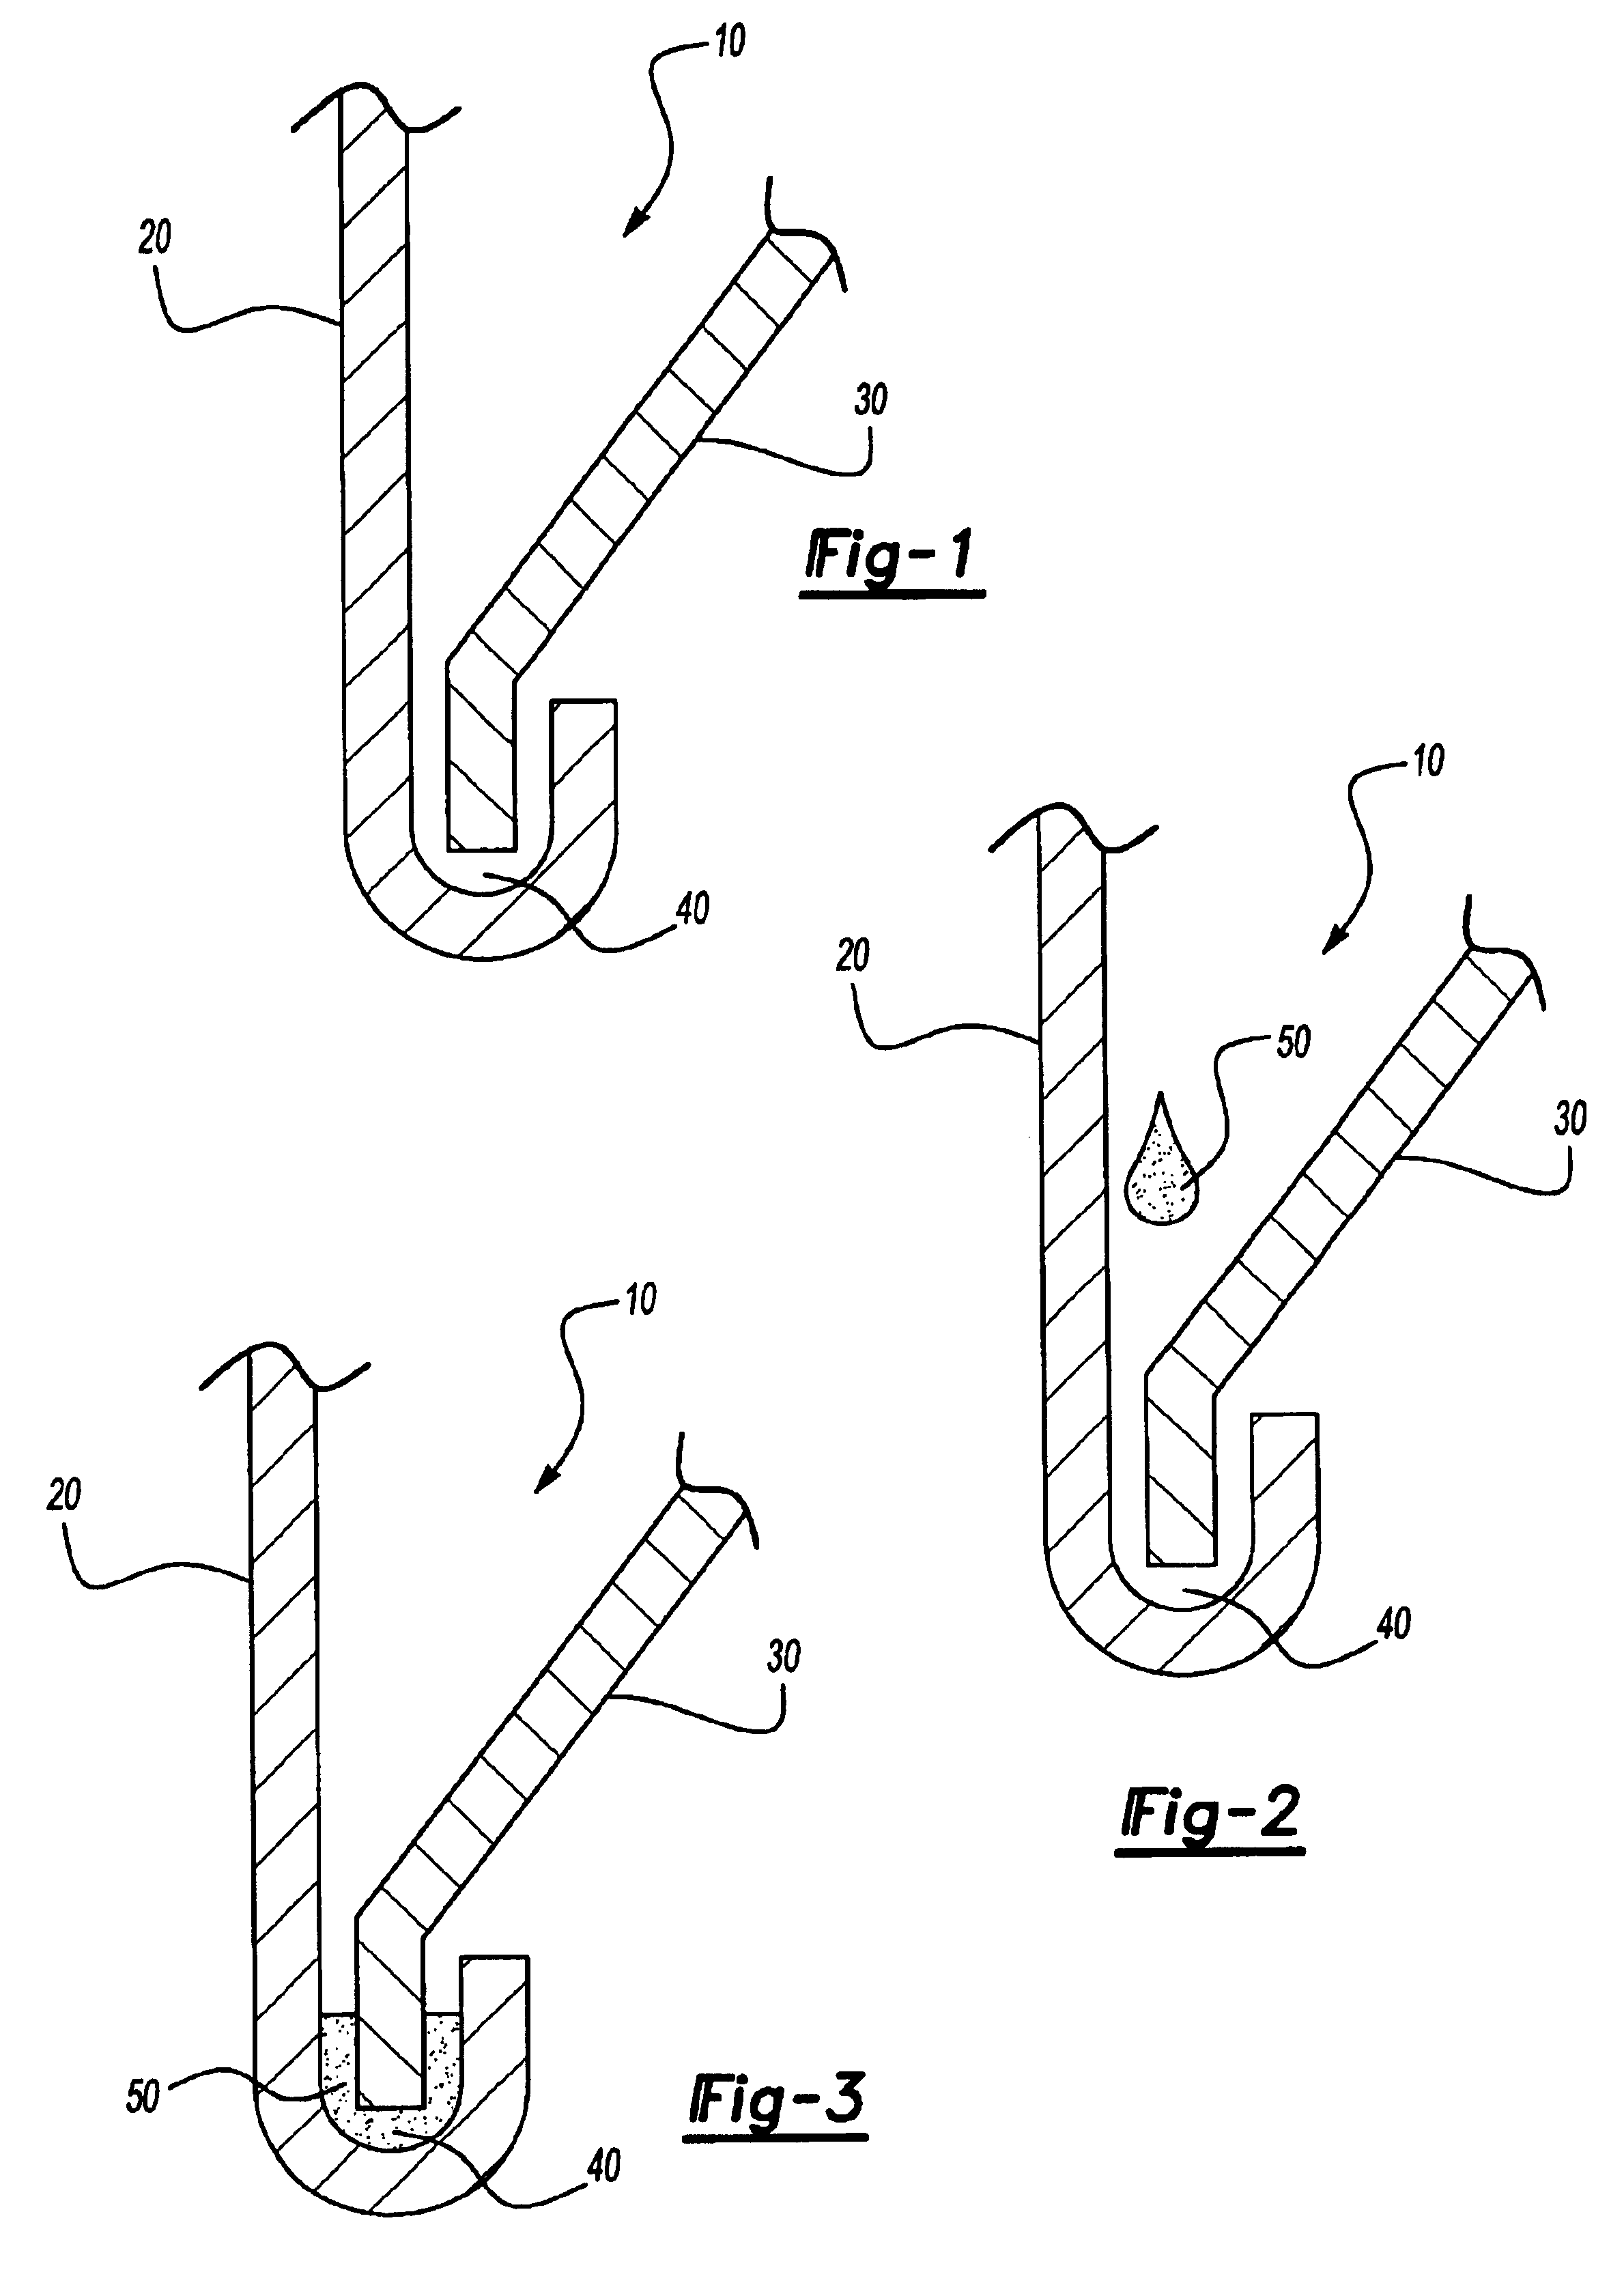 Structural hot melt material and methods